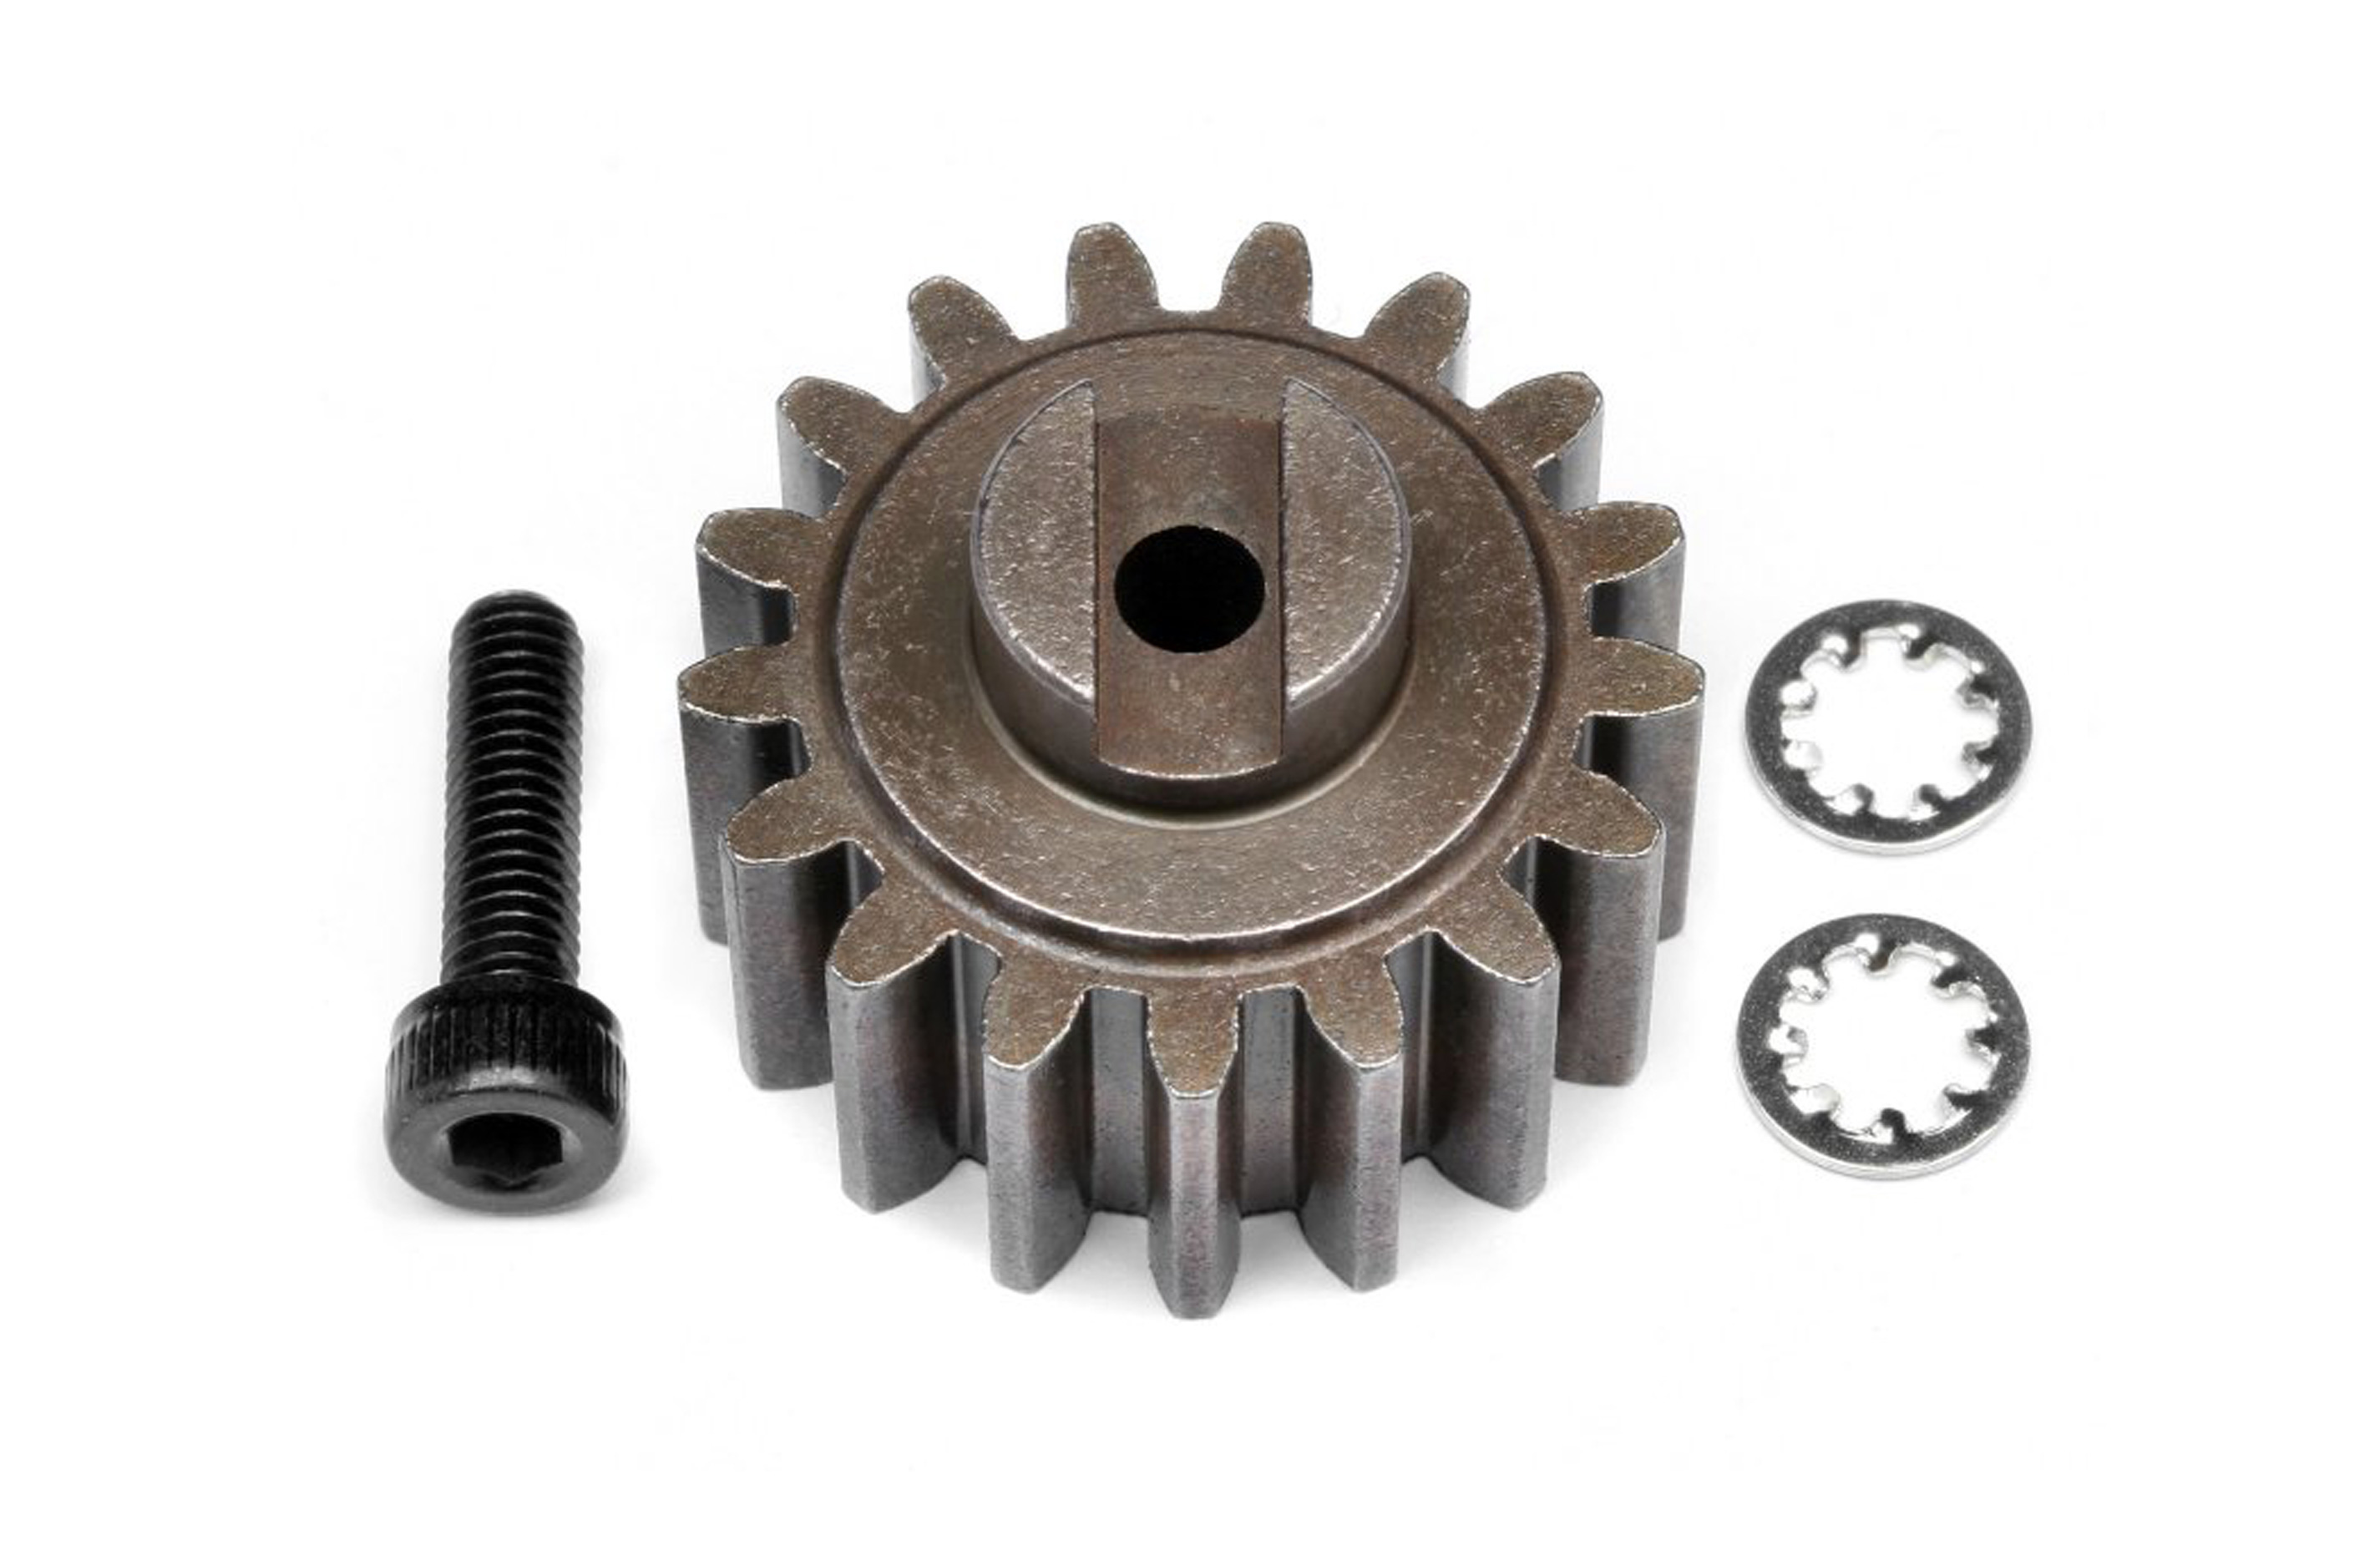 86493 HPI Pinion Gear 17 tooth for Baja 5B